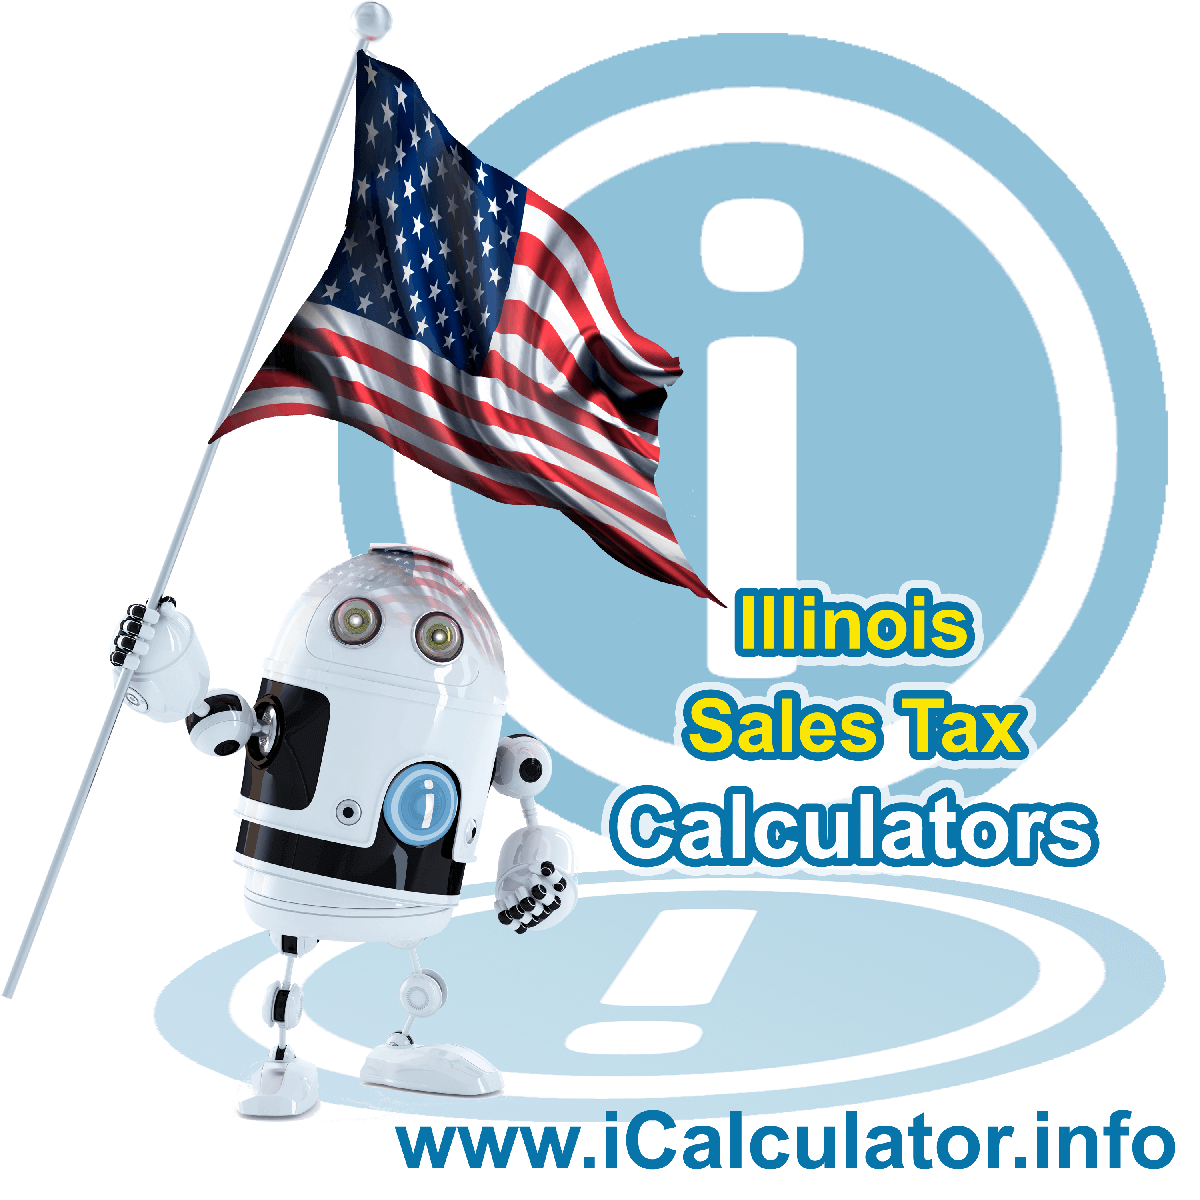 Marseilles Sales Rates: This image illustrates a calculator robot calculating Marseilles sales tax manually using the Marseilles Sales Tax Formula. You can use this information to calculate Marseilles Sales Tax manually or use the Marseilles Sales Tax Calculator to calculate sales tax online.